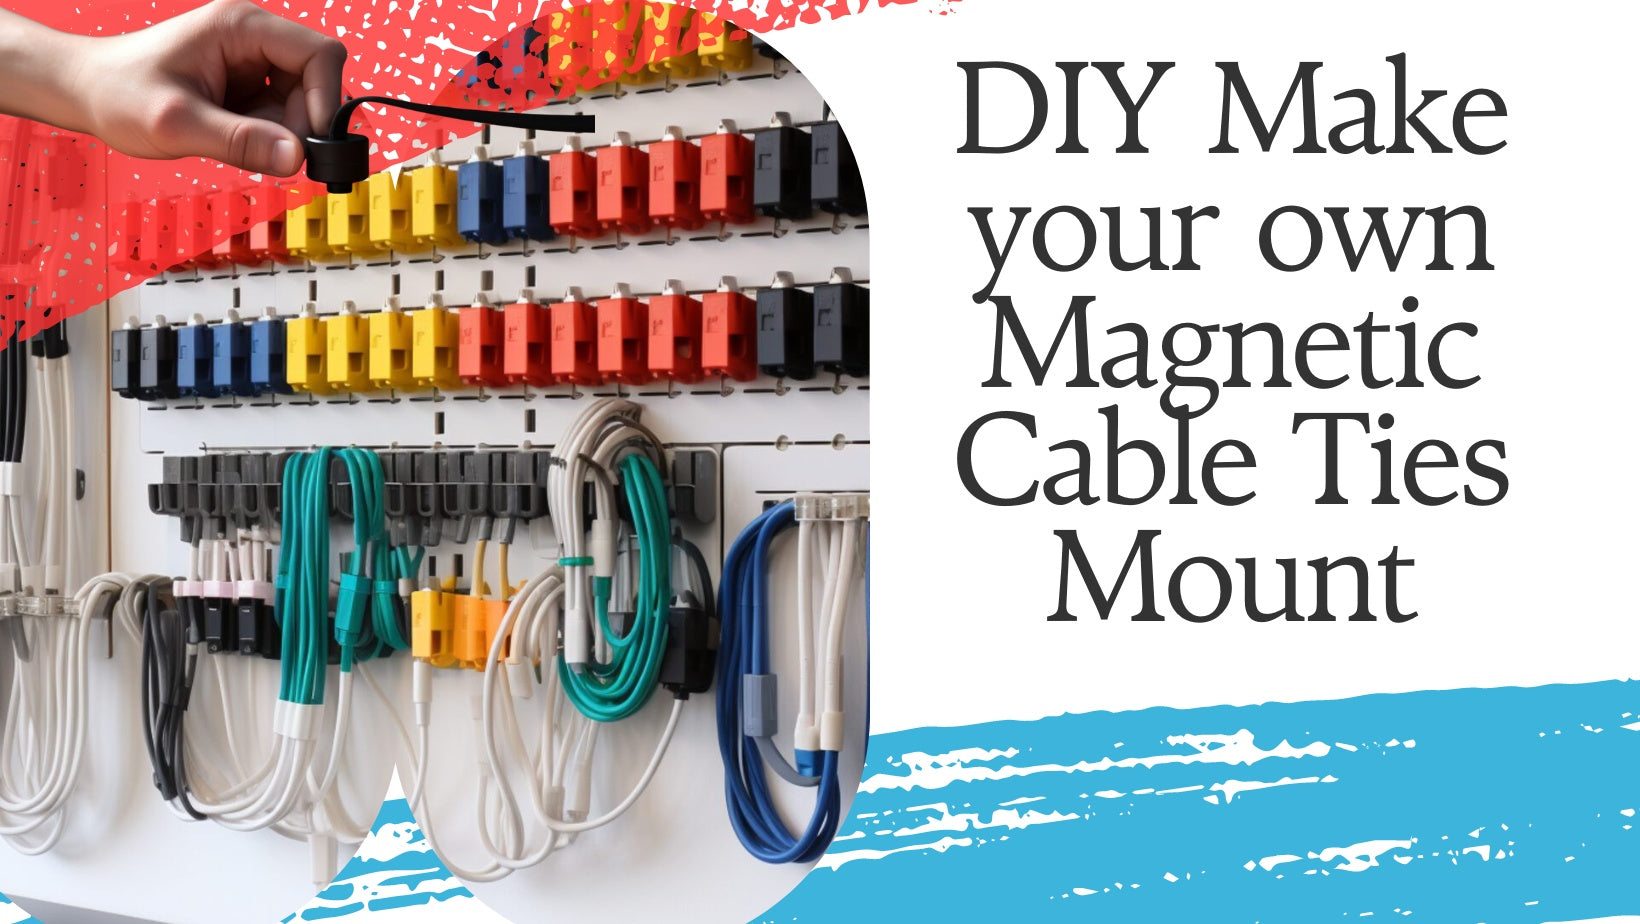 Create Your Own Magnetic Cable Tie Mounts easy!